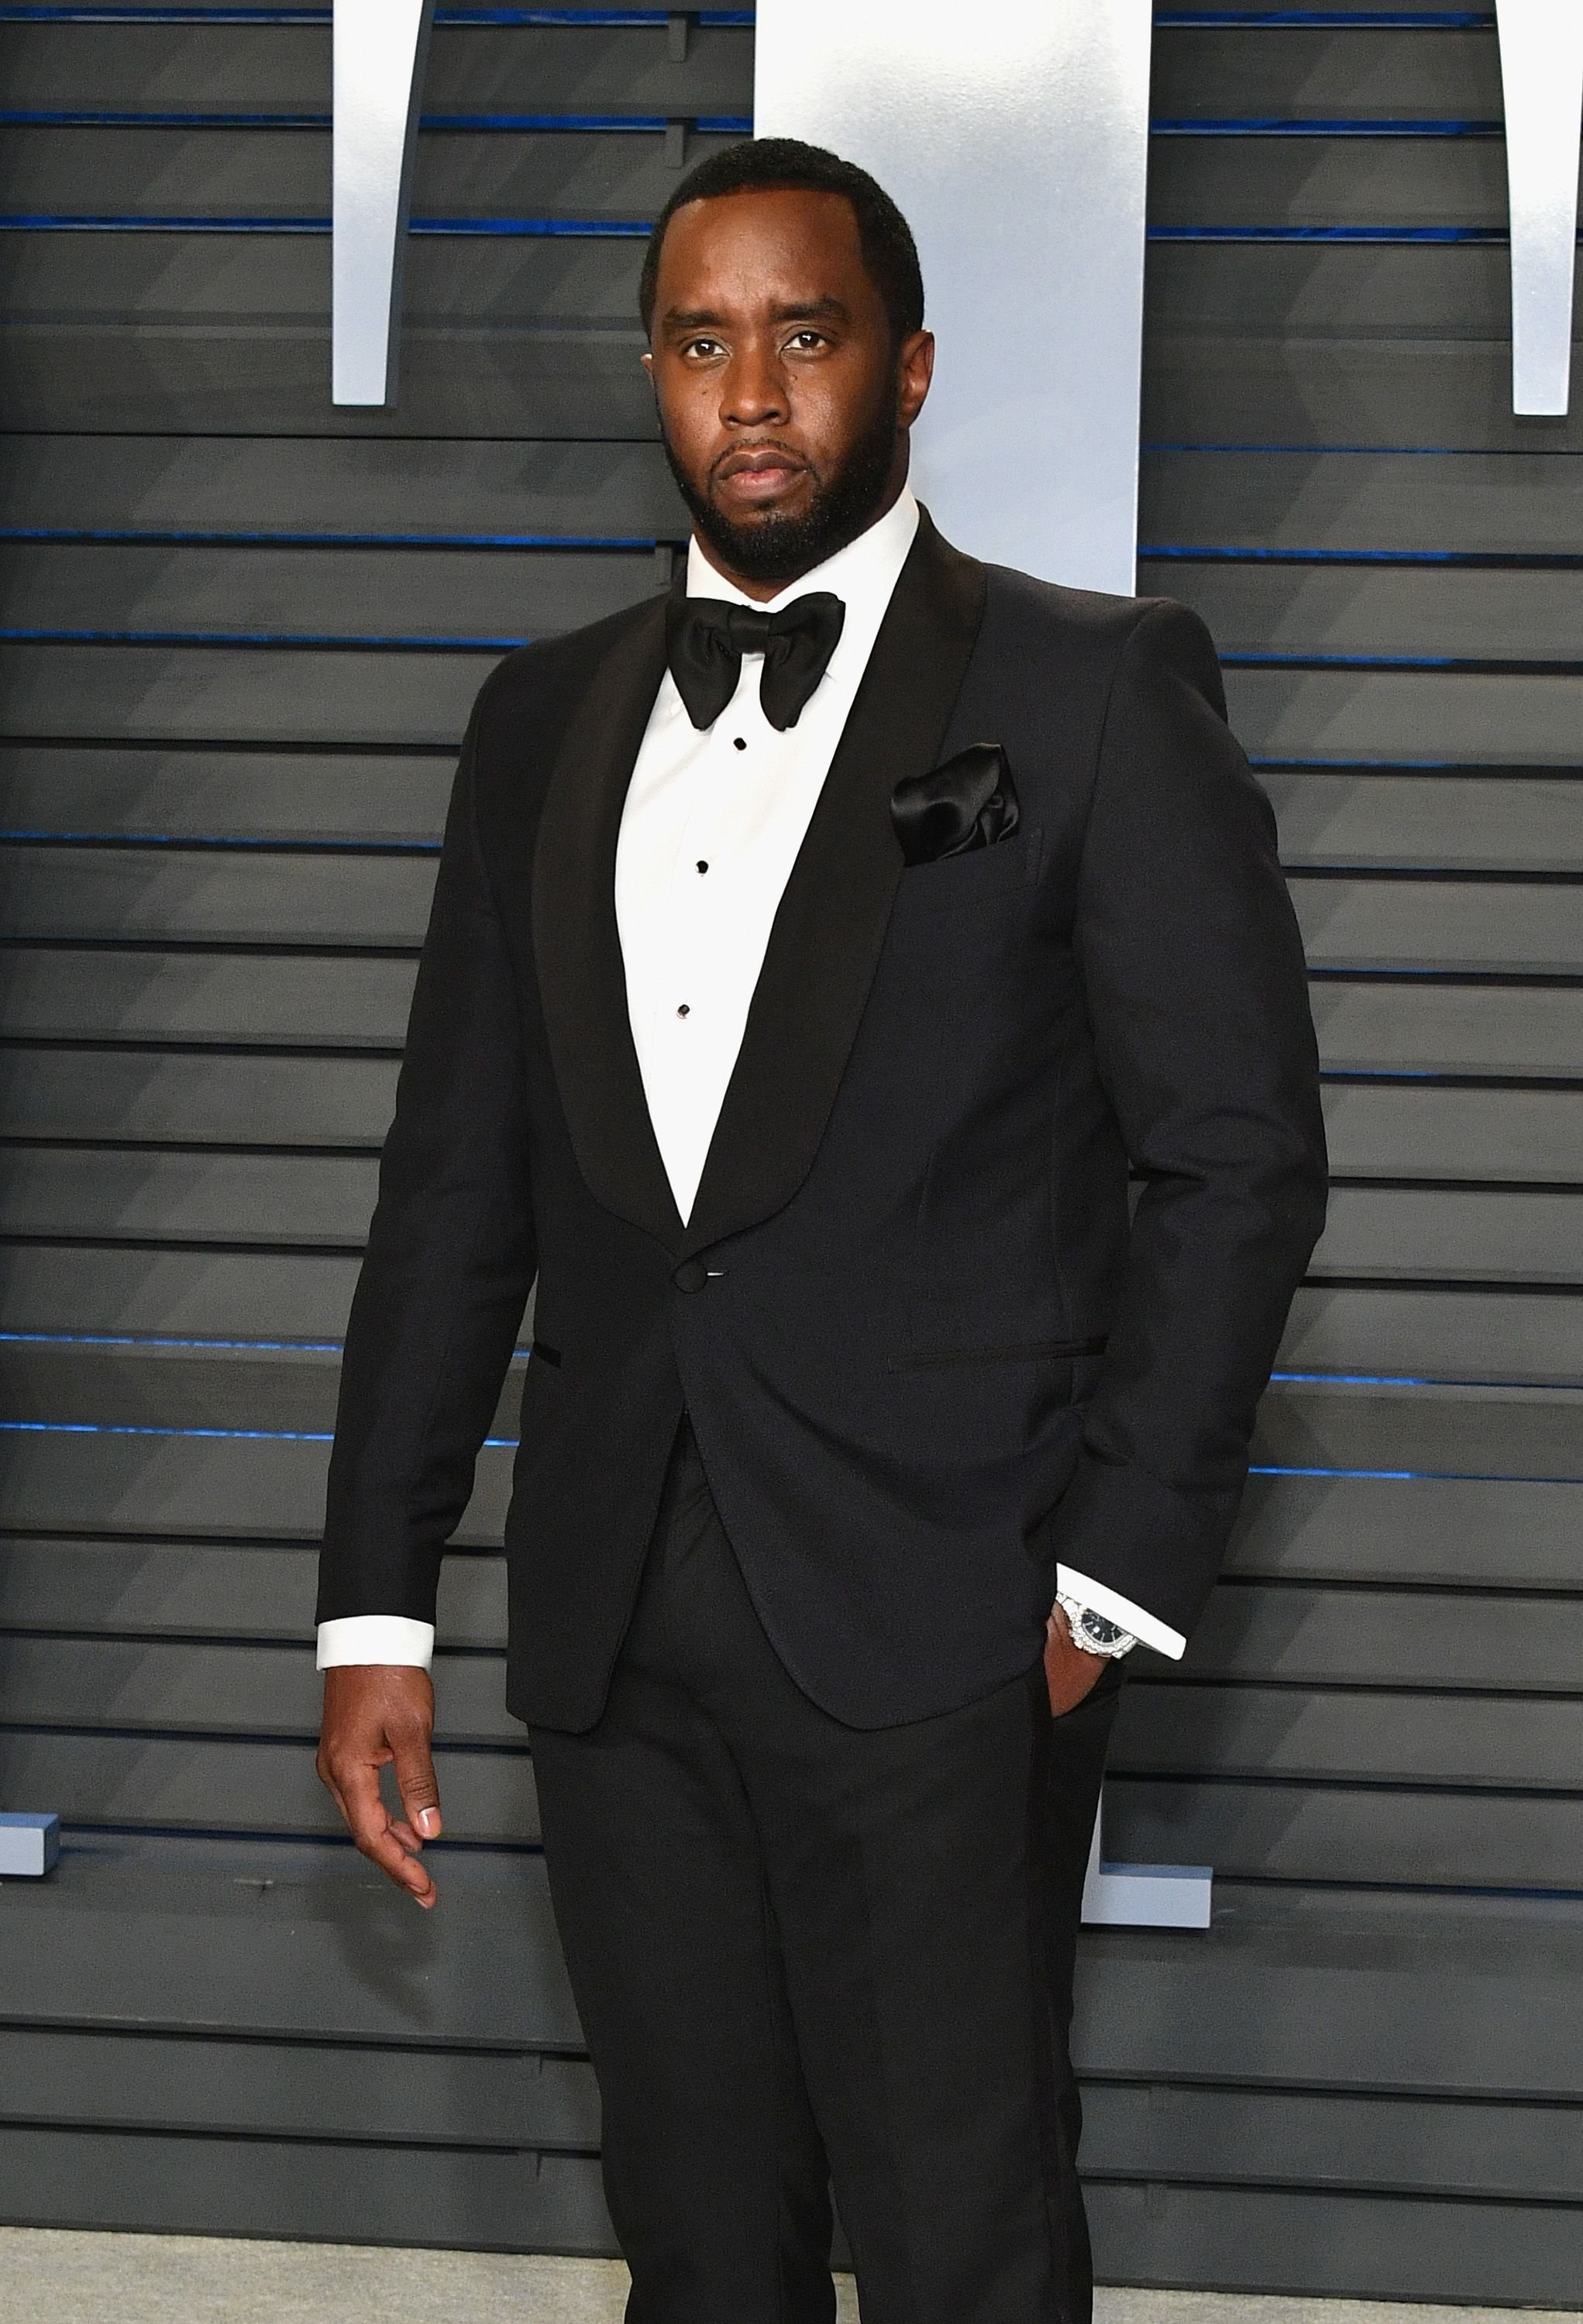 Veteran rapper Diddy attends the Vanity Fair Oscar Party at Wallis Annenberg Center for the Performing Arts in March 2018. | Photo: Getty Images